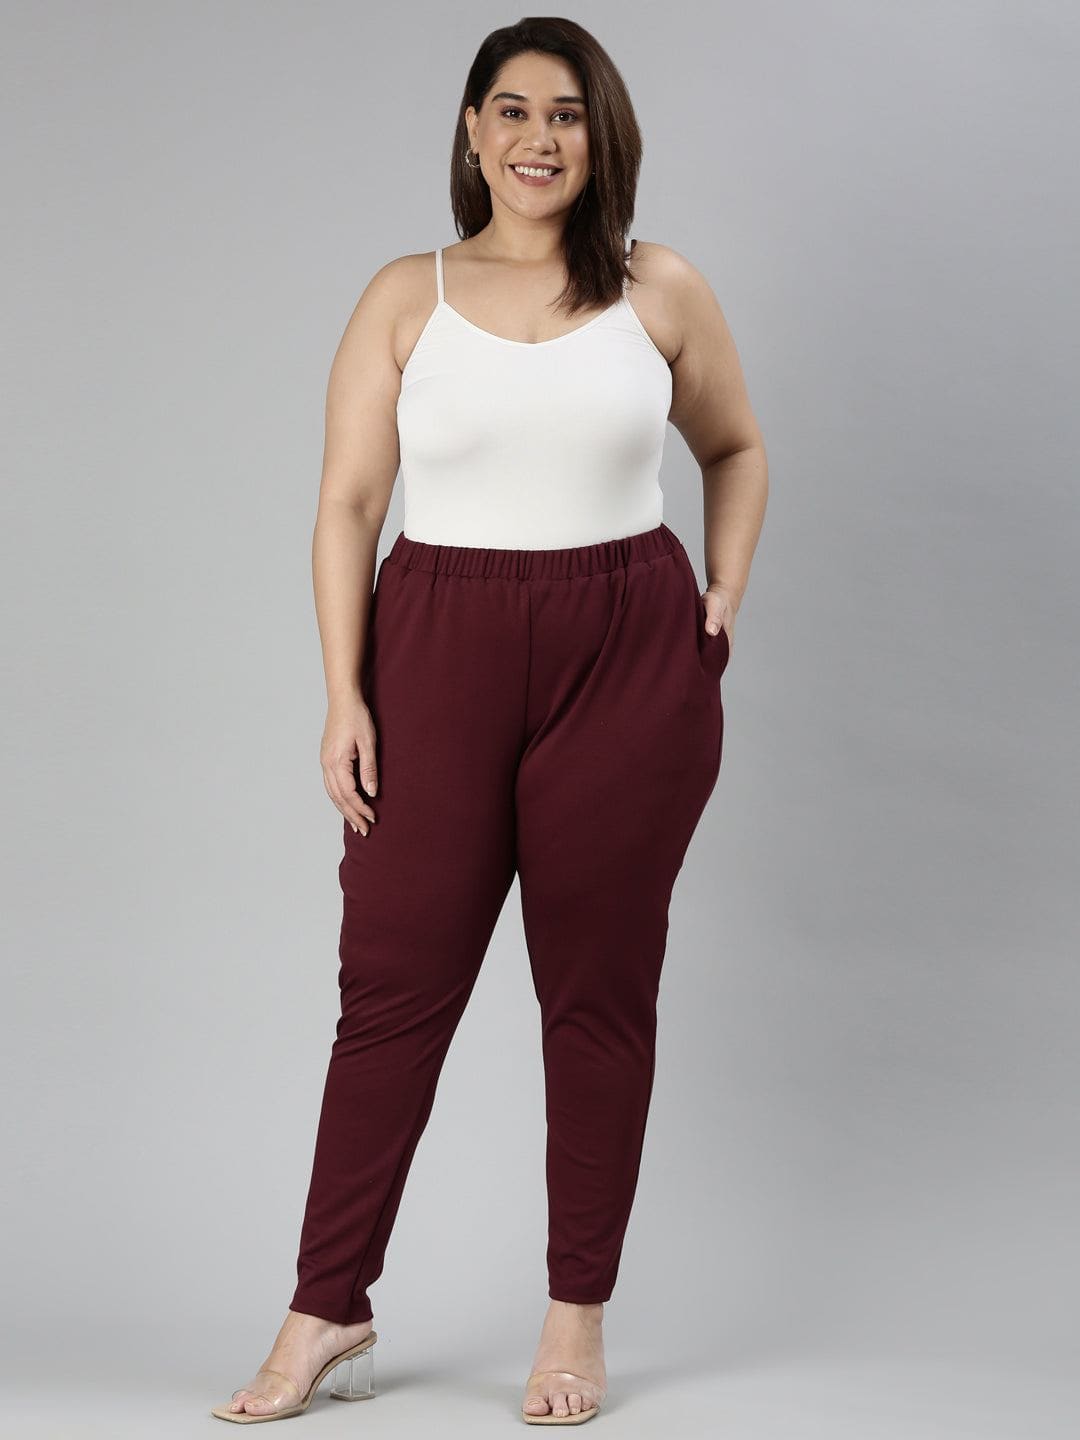 TheShaili - Women's Tapered fit Spandex Maroon Trousers